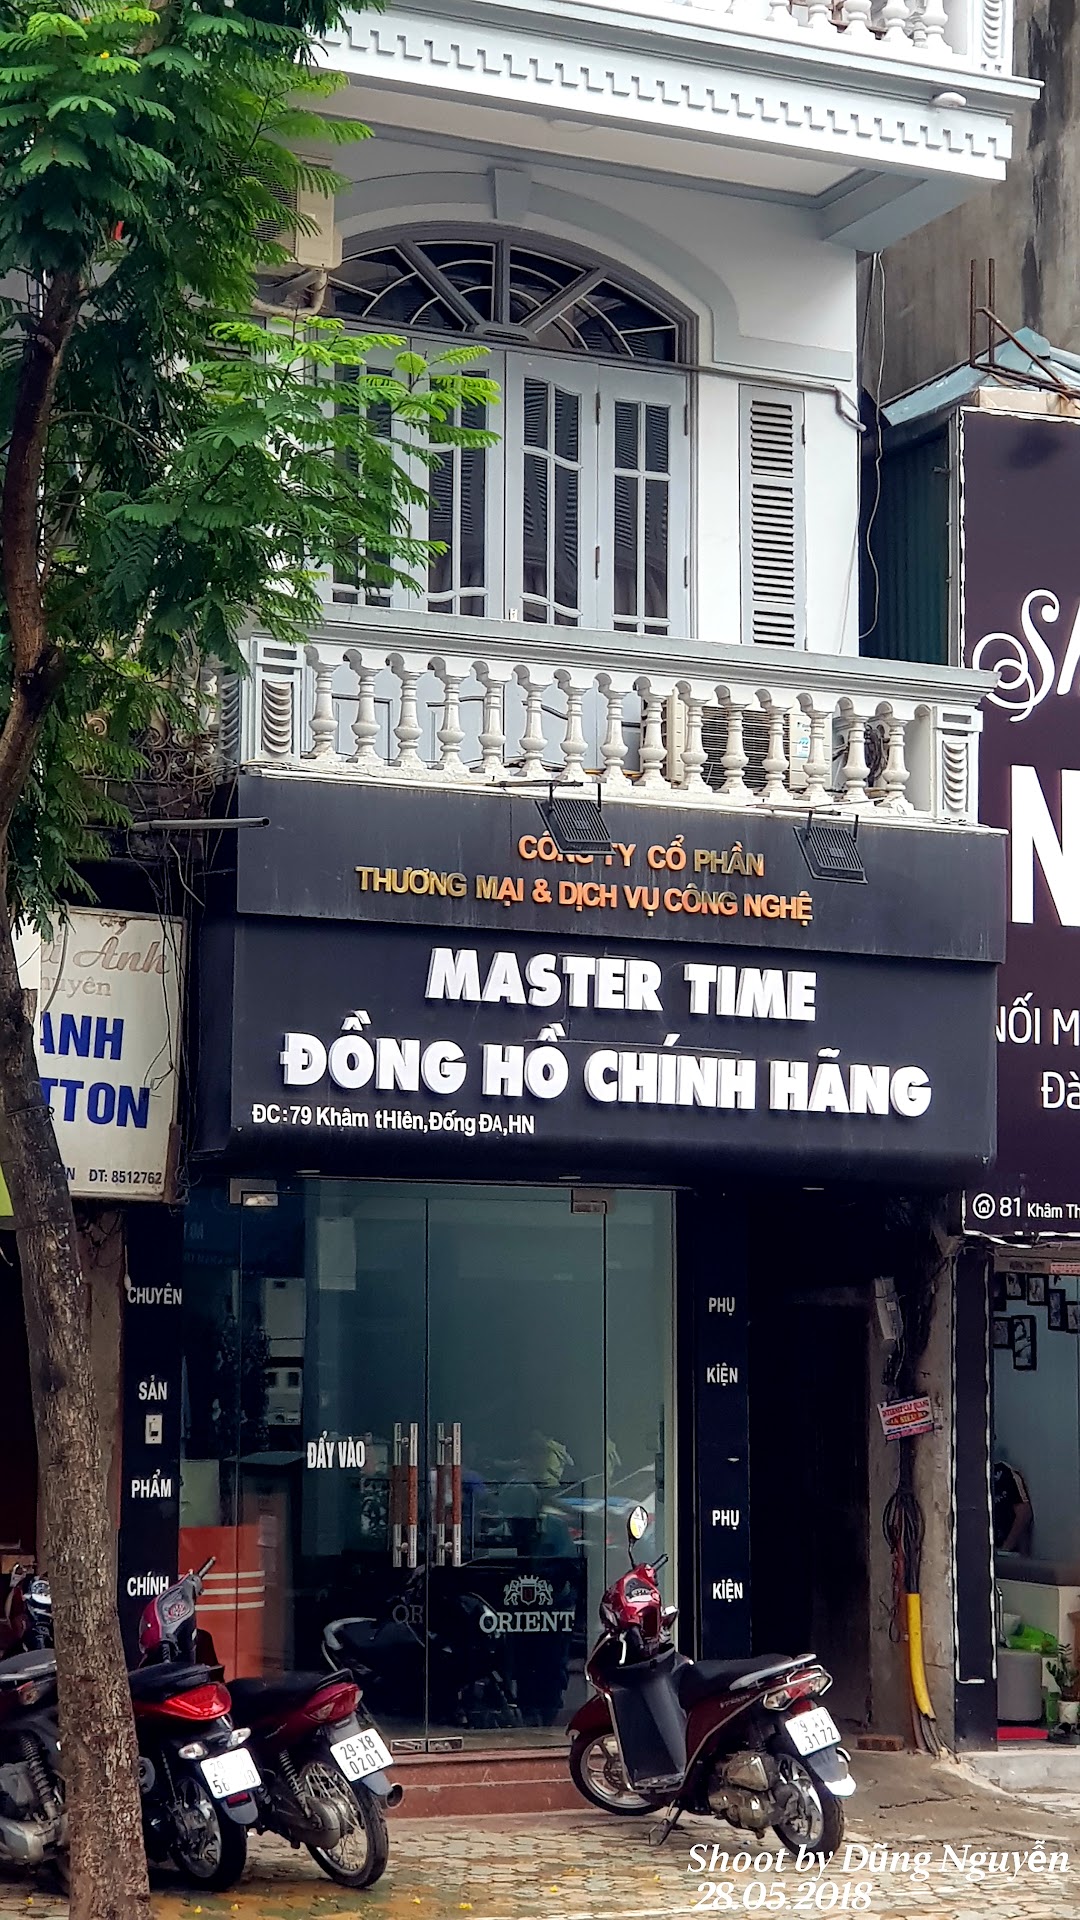 MASTER TIME